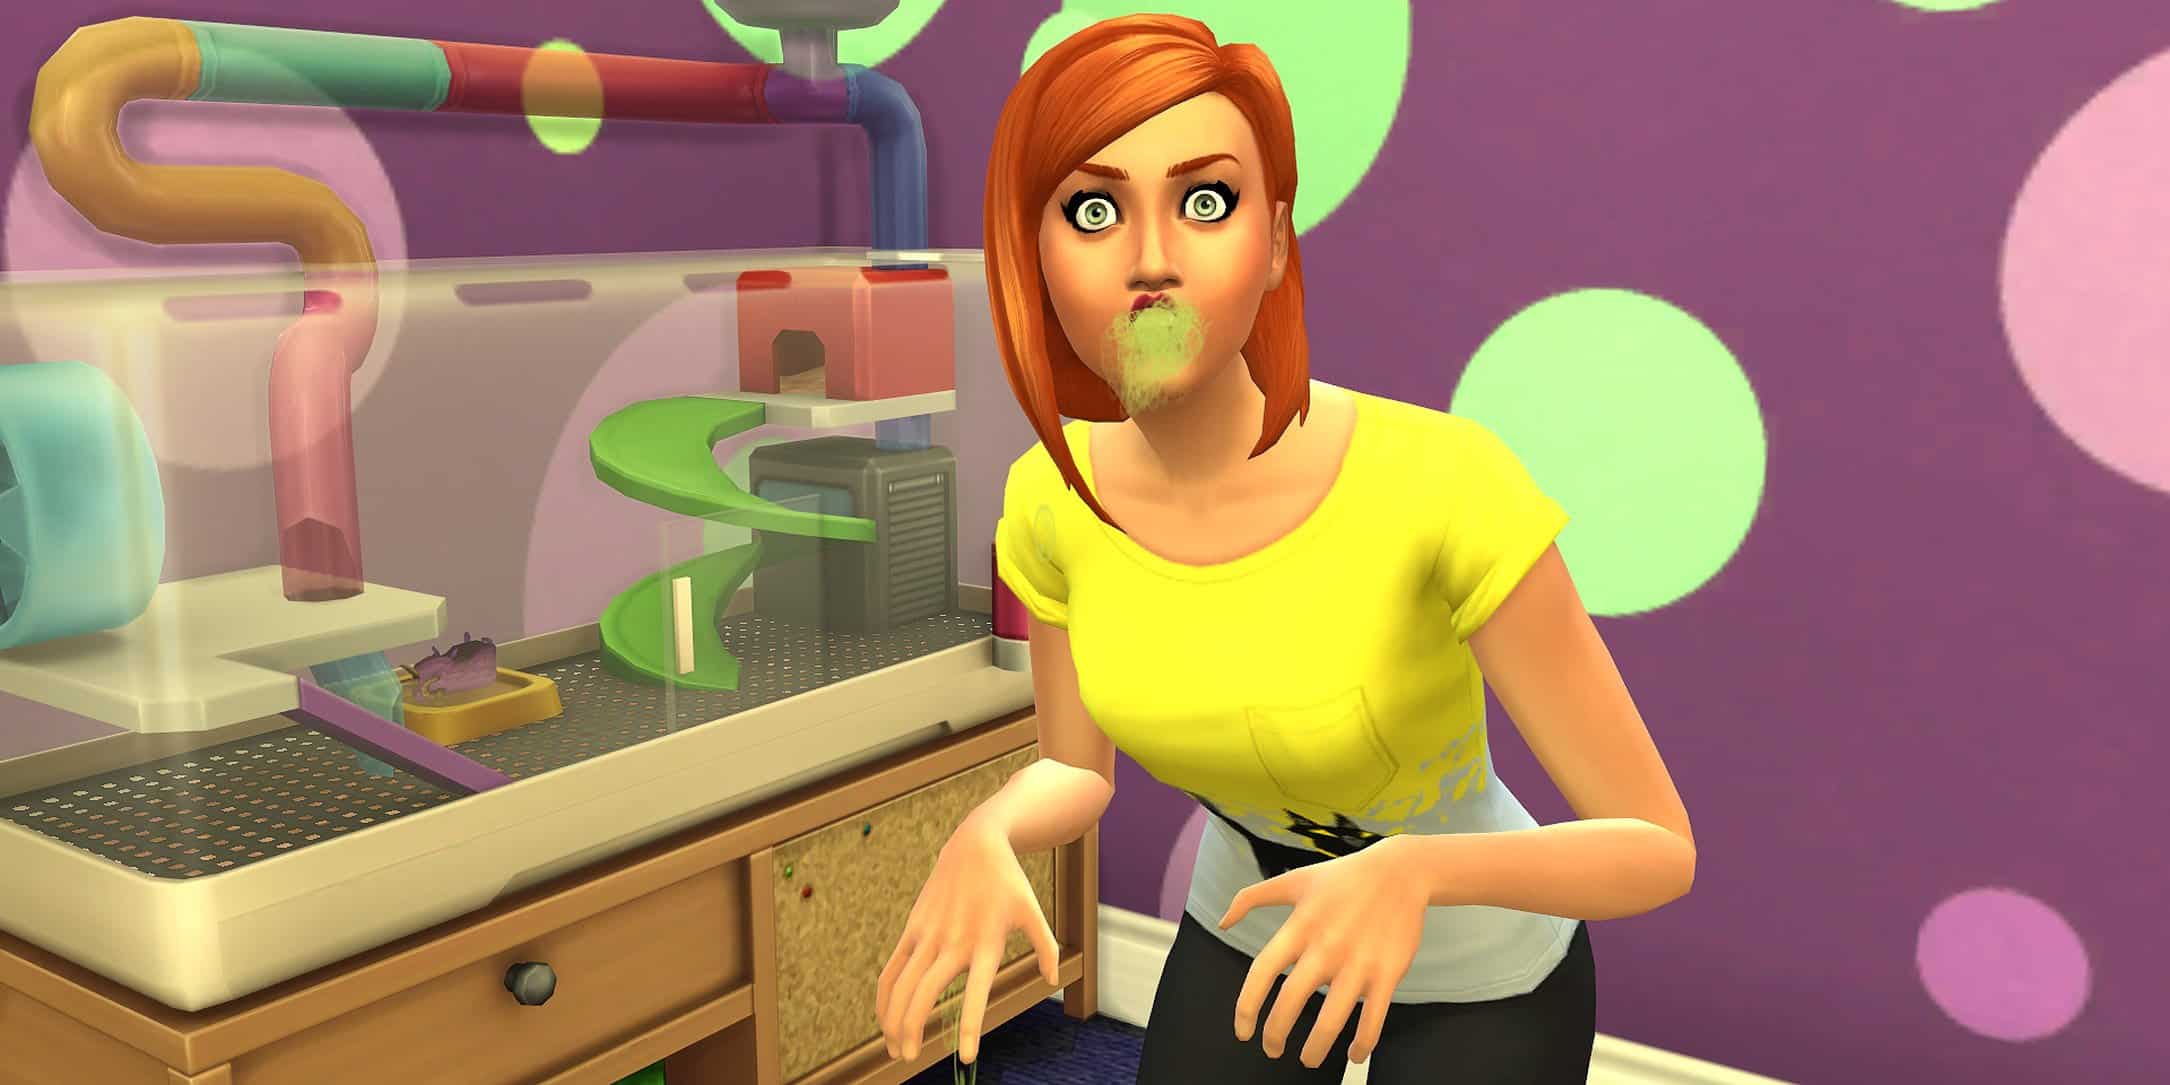 Sim dies in The Sims 4 in My First Pet Stuff.